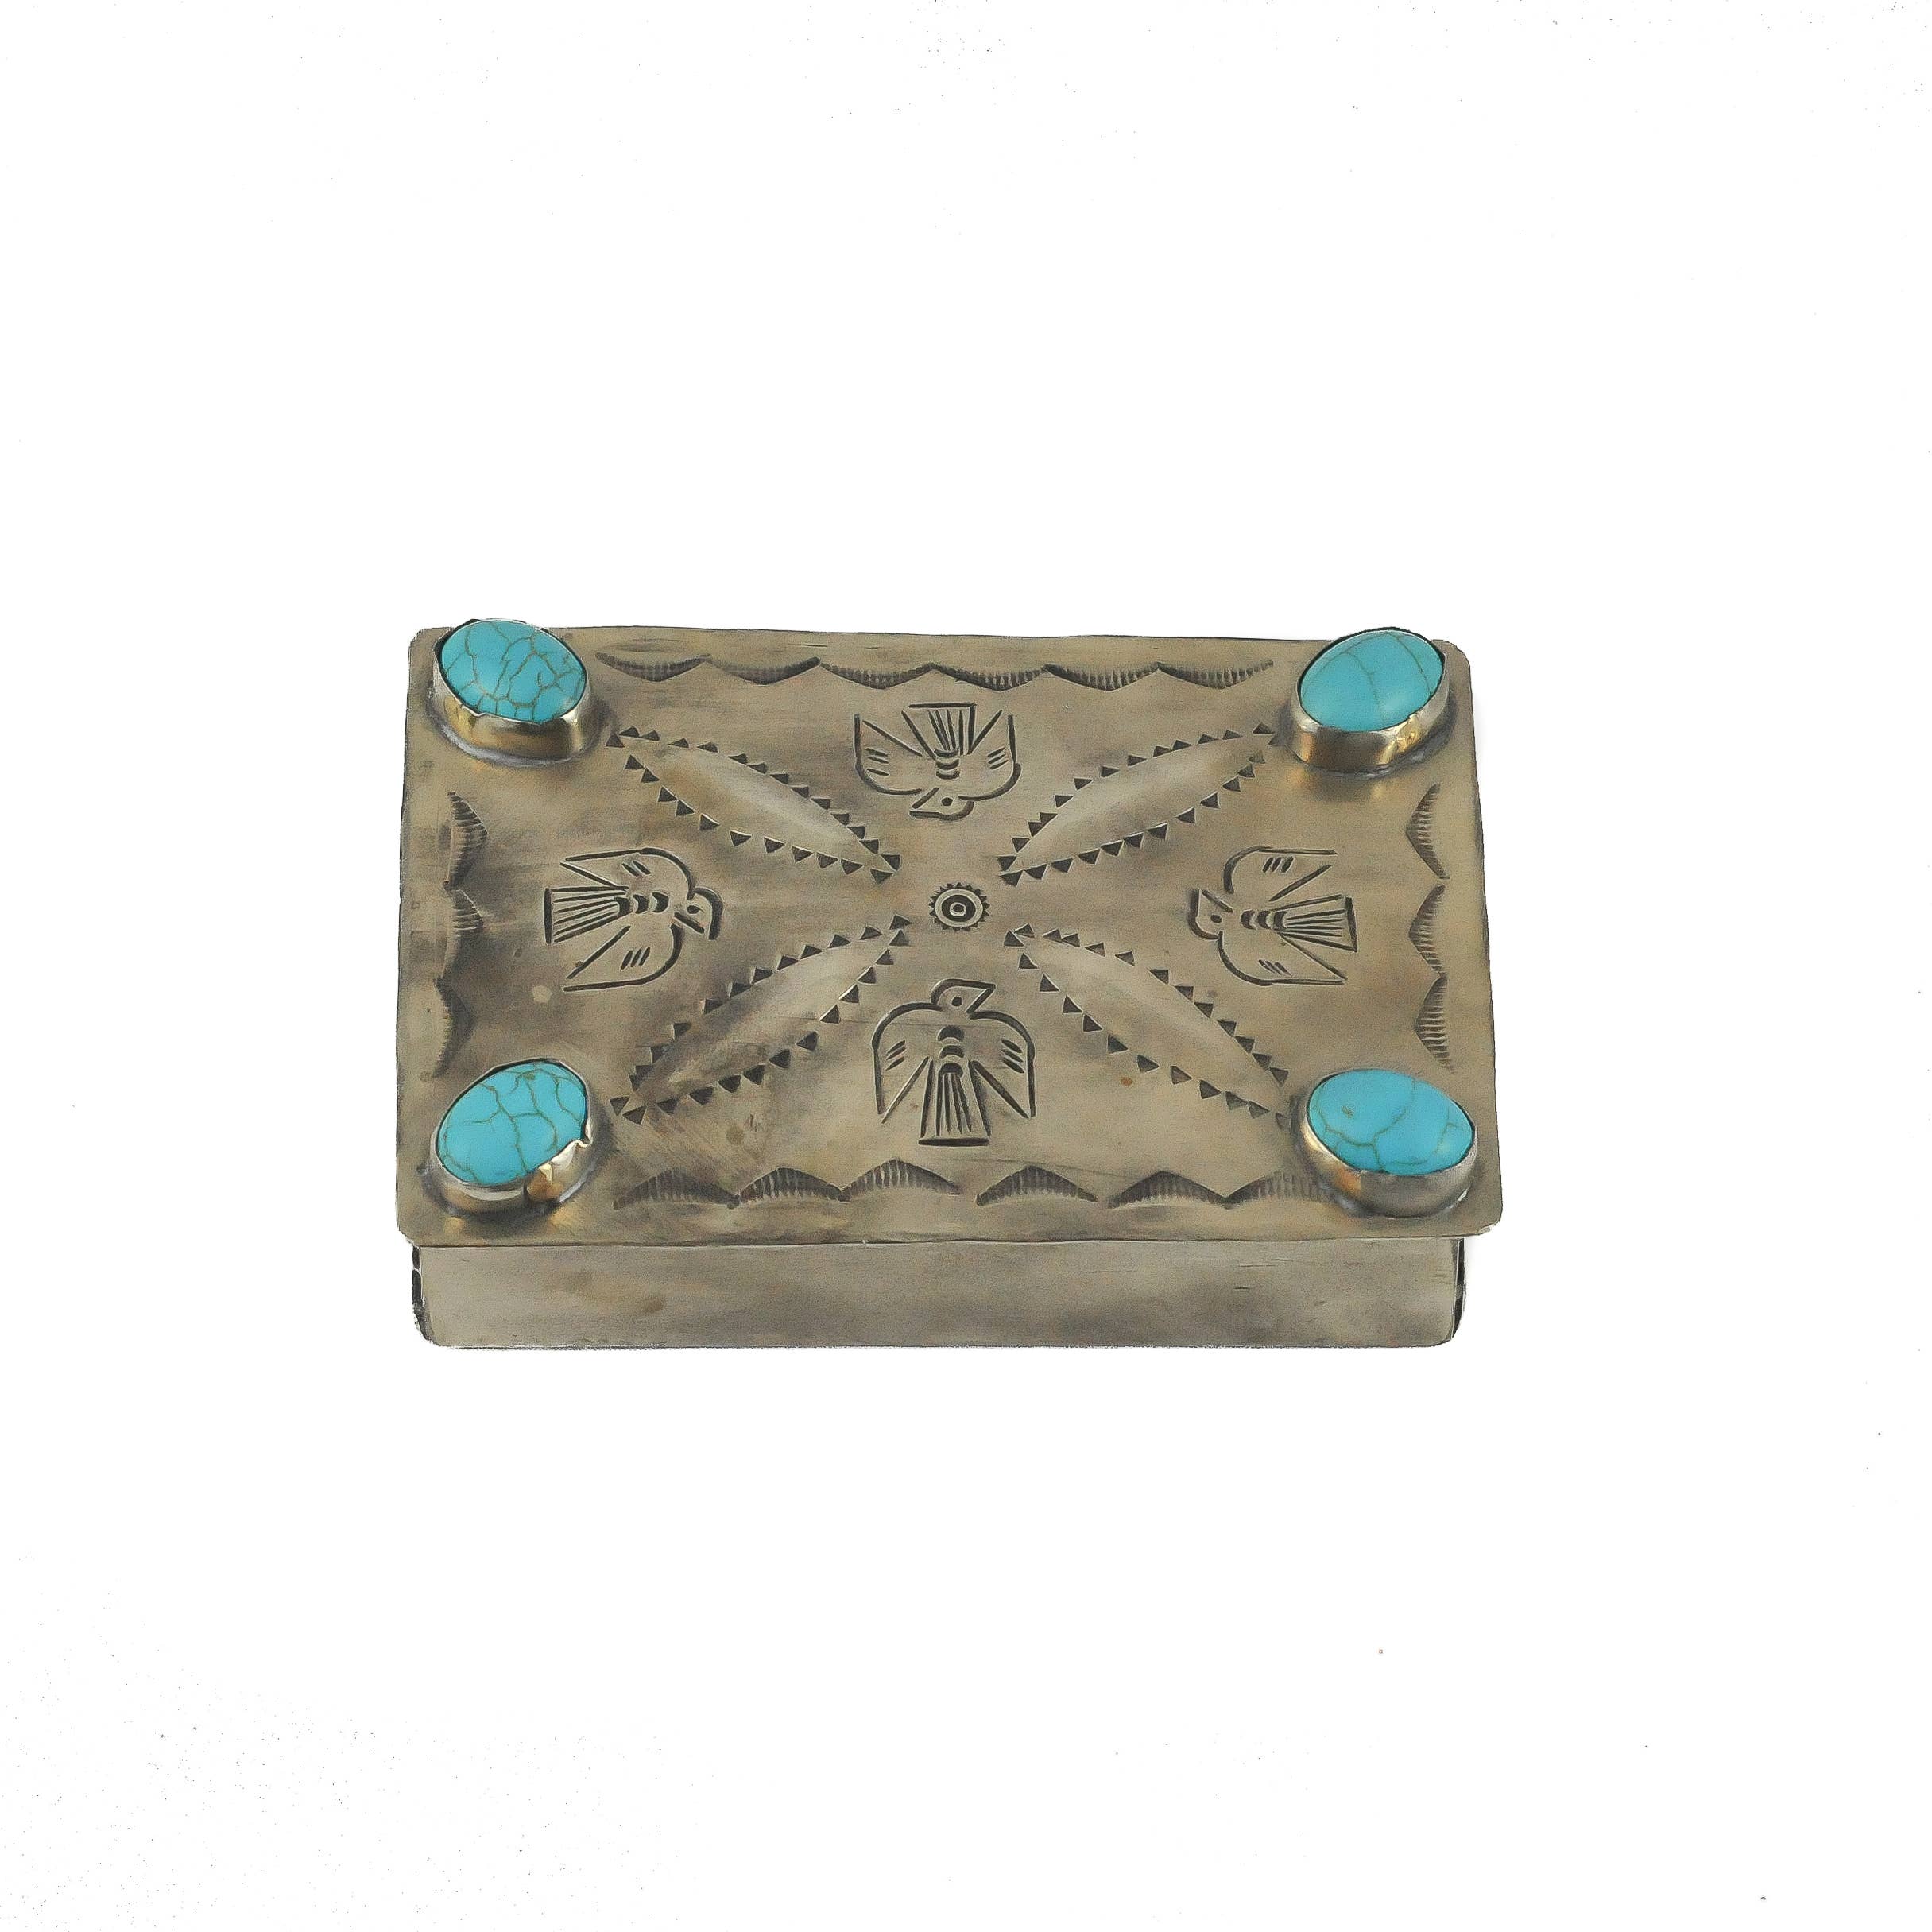 Stamped Repousse Box With Turquoise